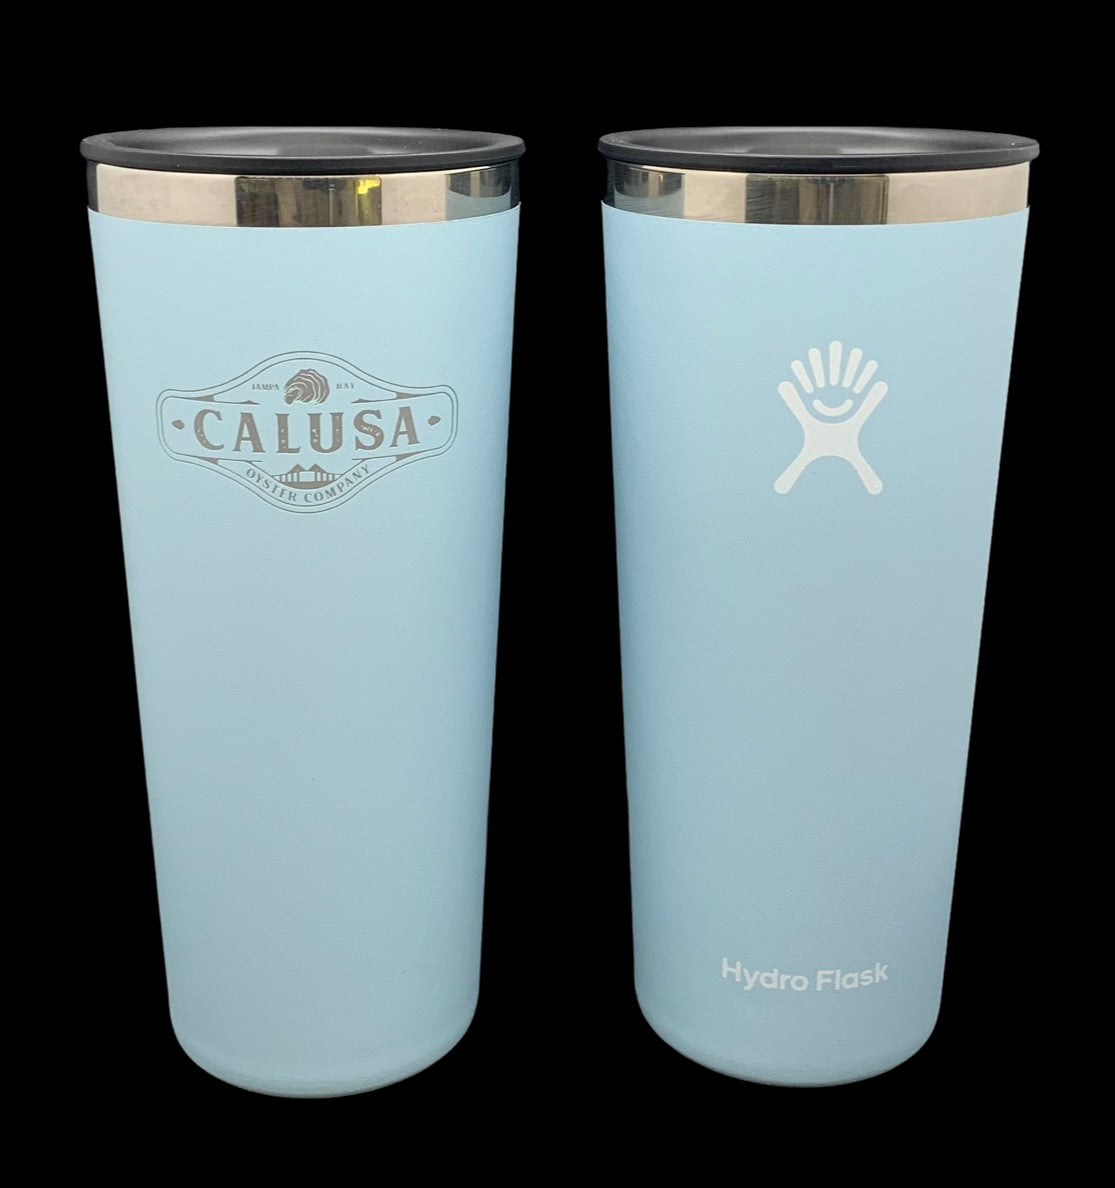 Calusa "Boat Tumbler" by Hydro Flask